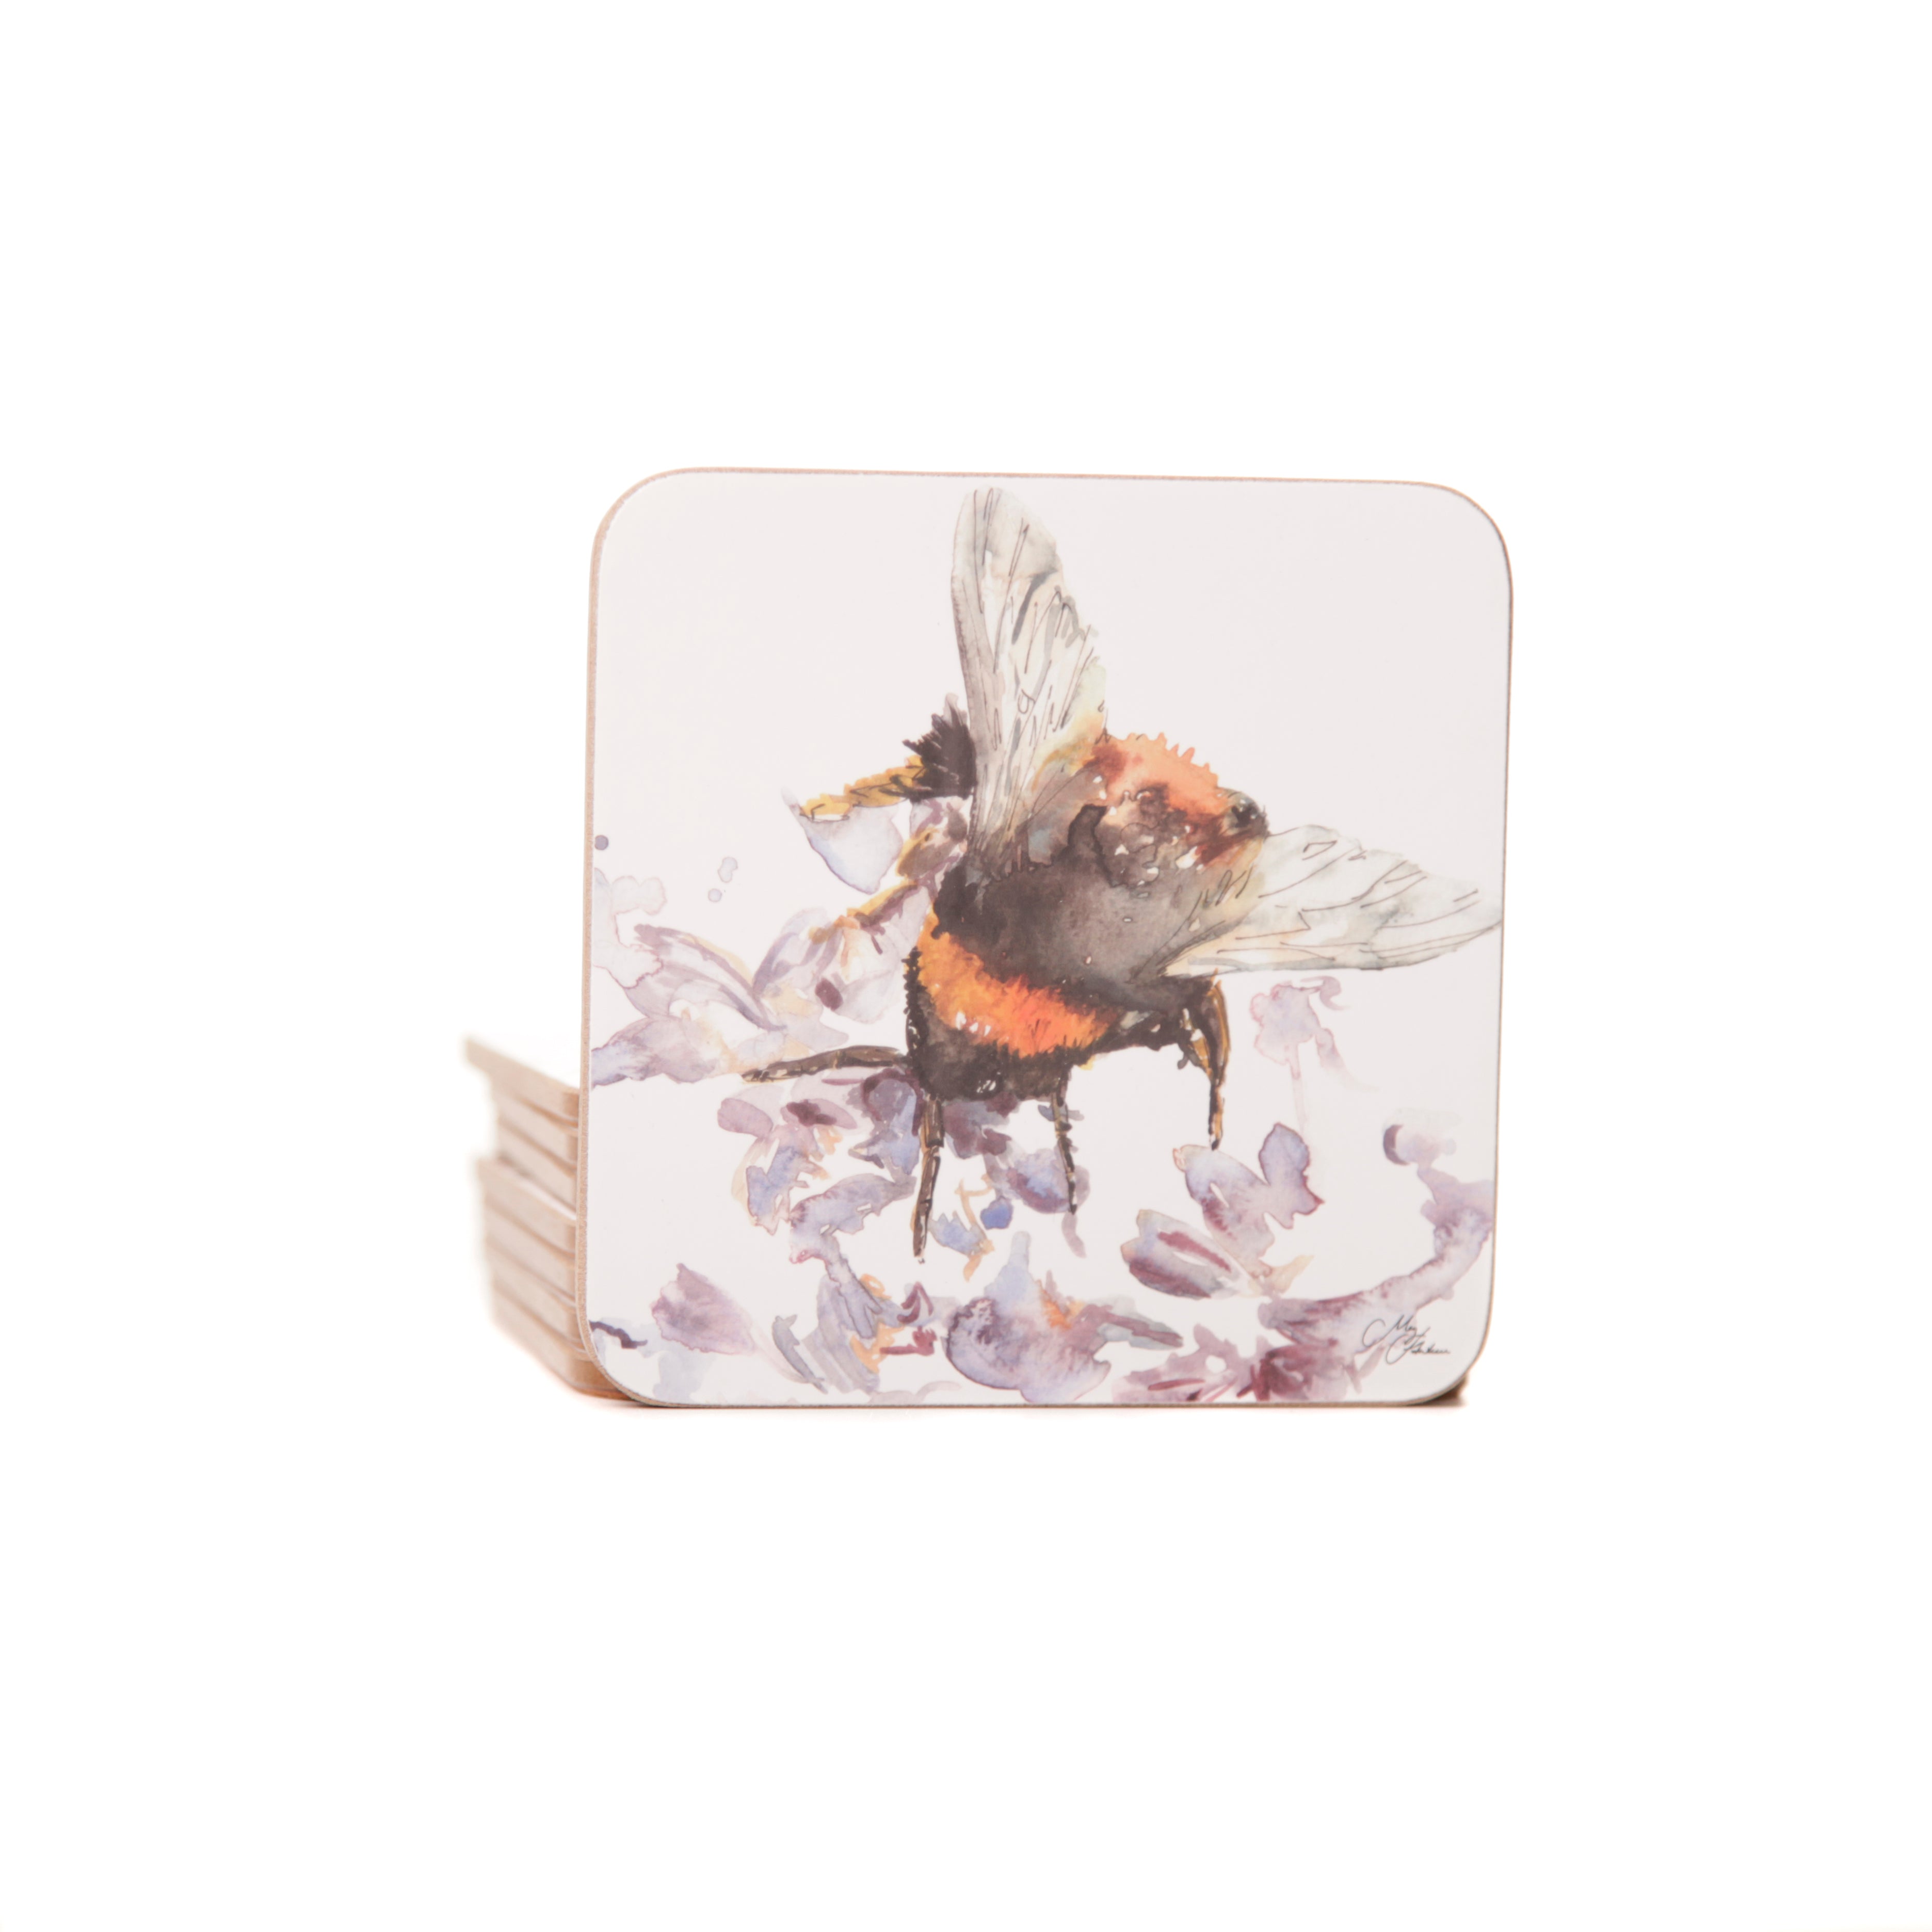 The Orchard' Bee Watercolour Design Coasters